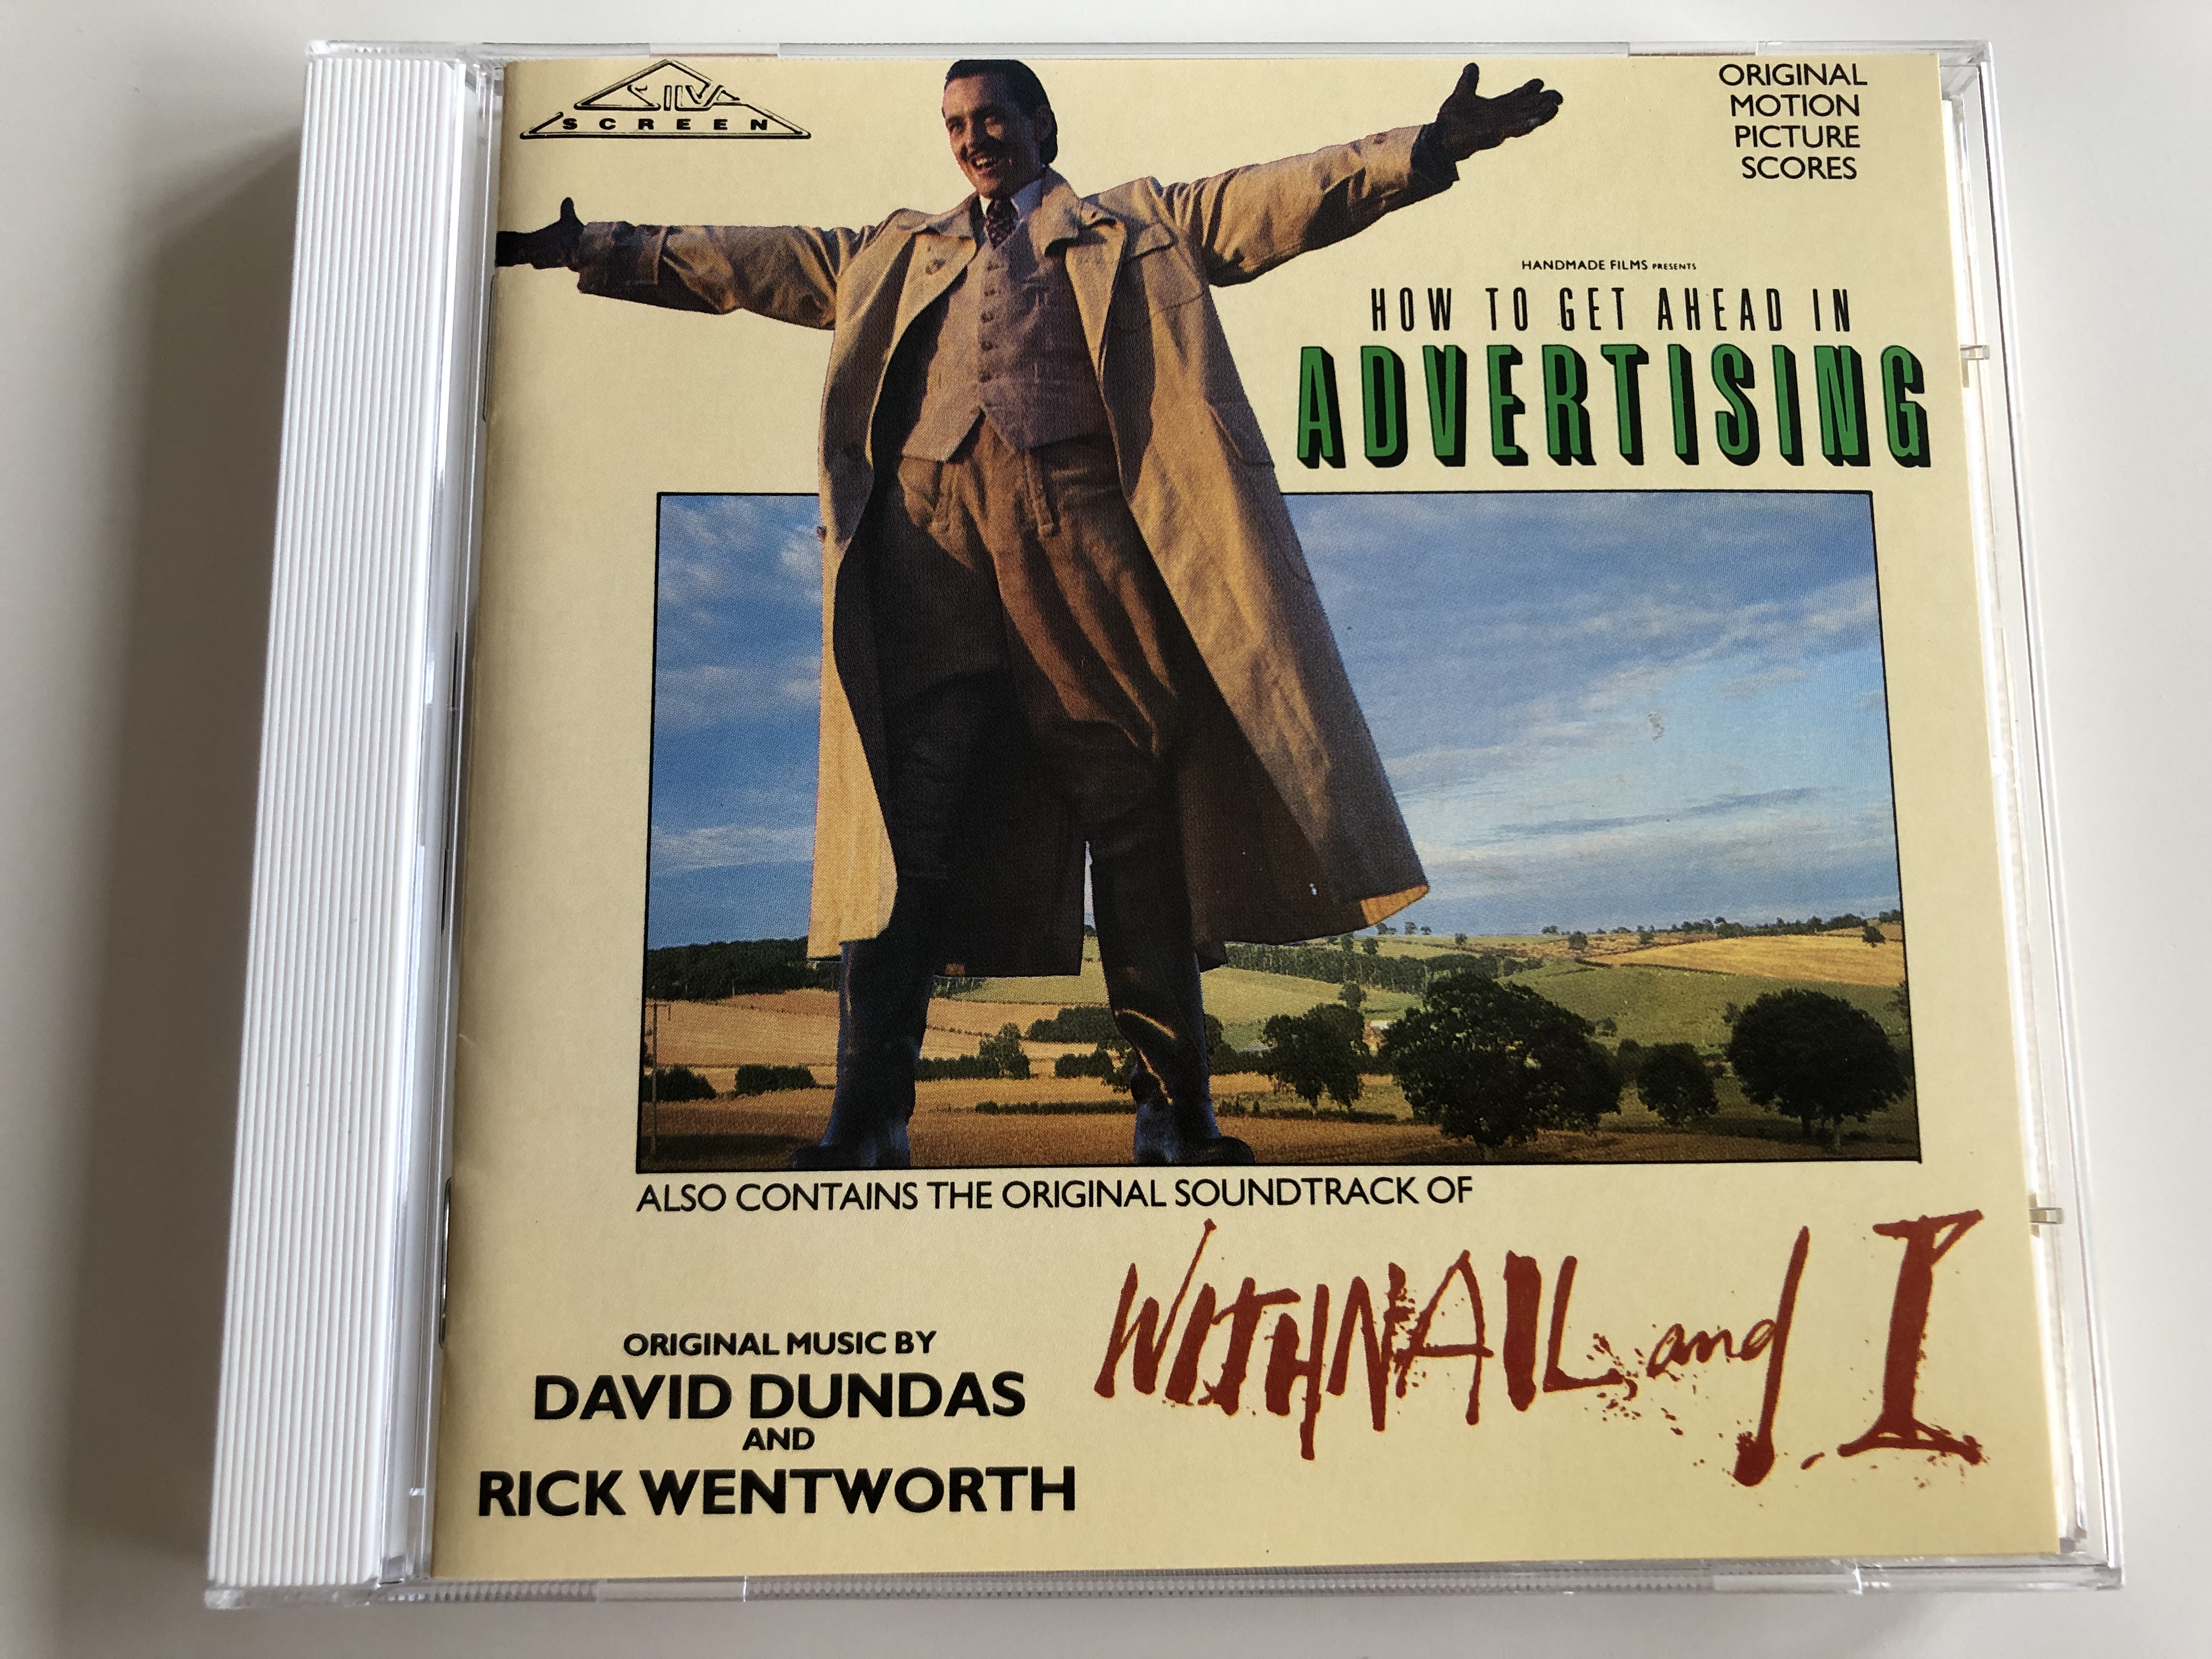 how-to-get-ahead-in-advertising-whitnail-and-i-original-music-by-david-dundas-rick-wentworth-original-motion-picture-scores-audio-cd-1989-filmcd-041-1-.jpg